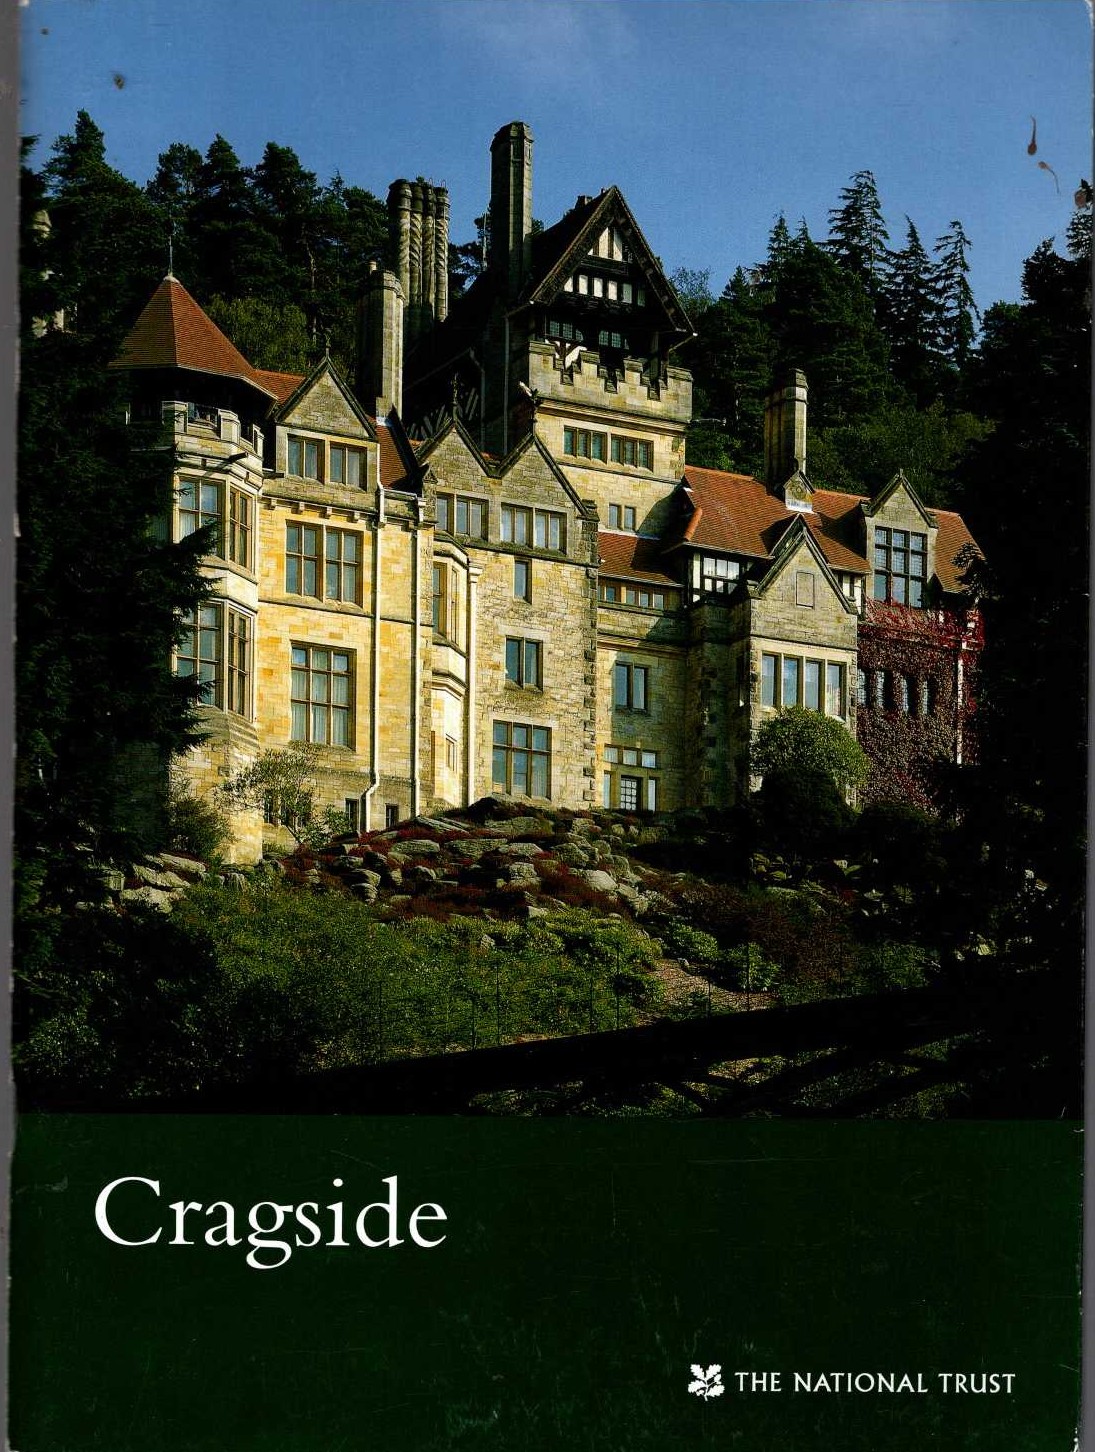 \ CRAGSIDE by The National Trust front book cover image